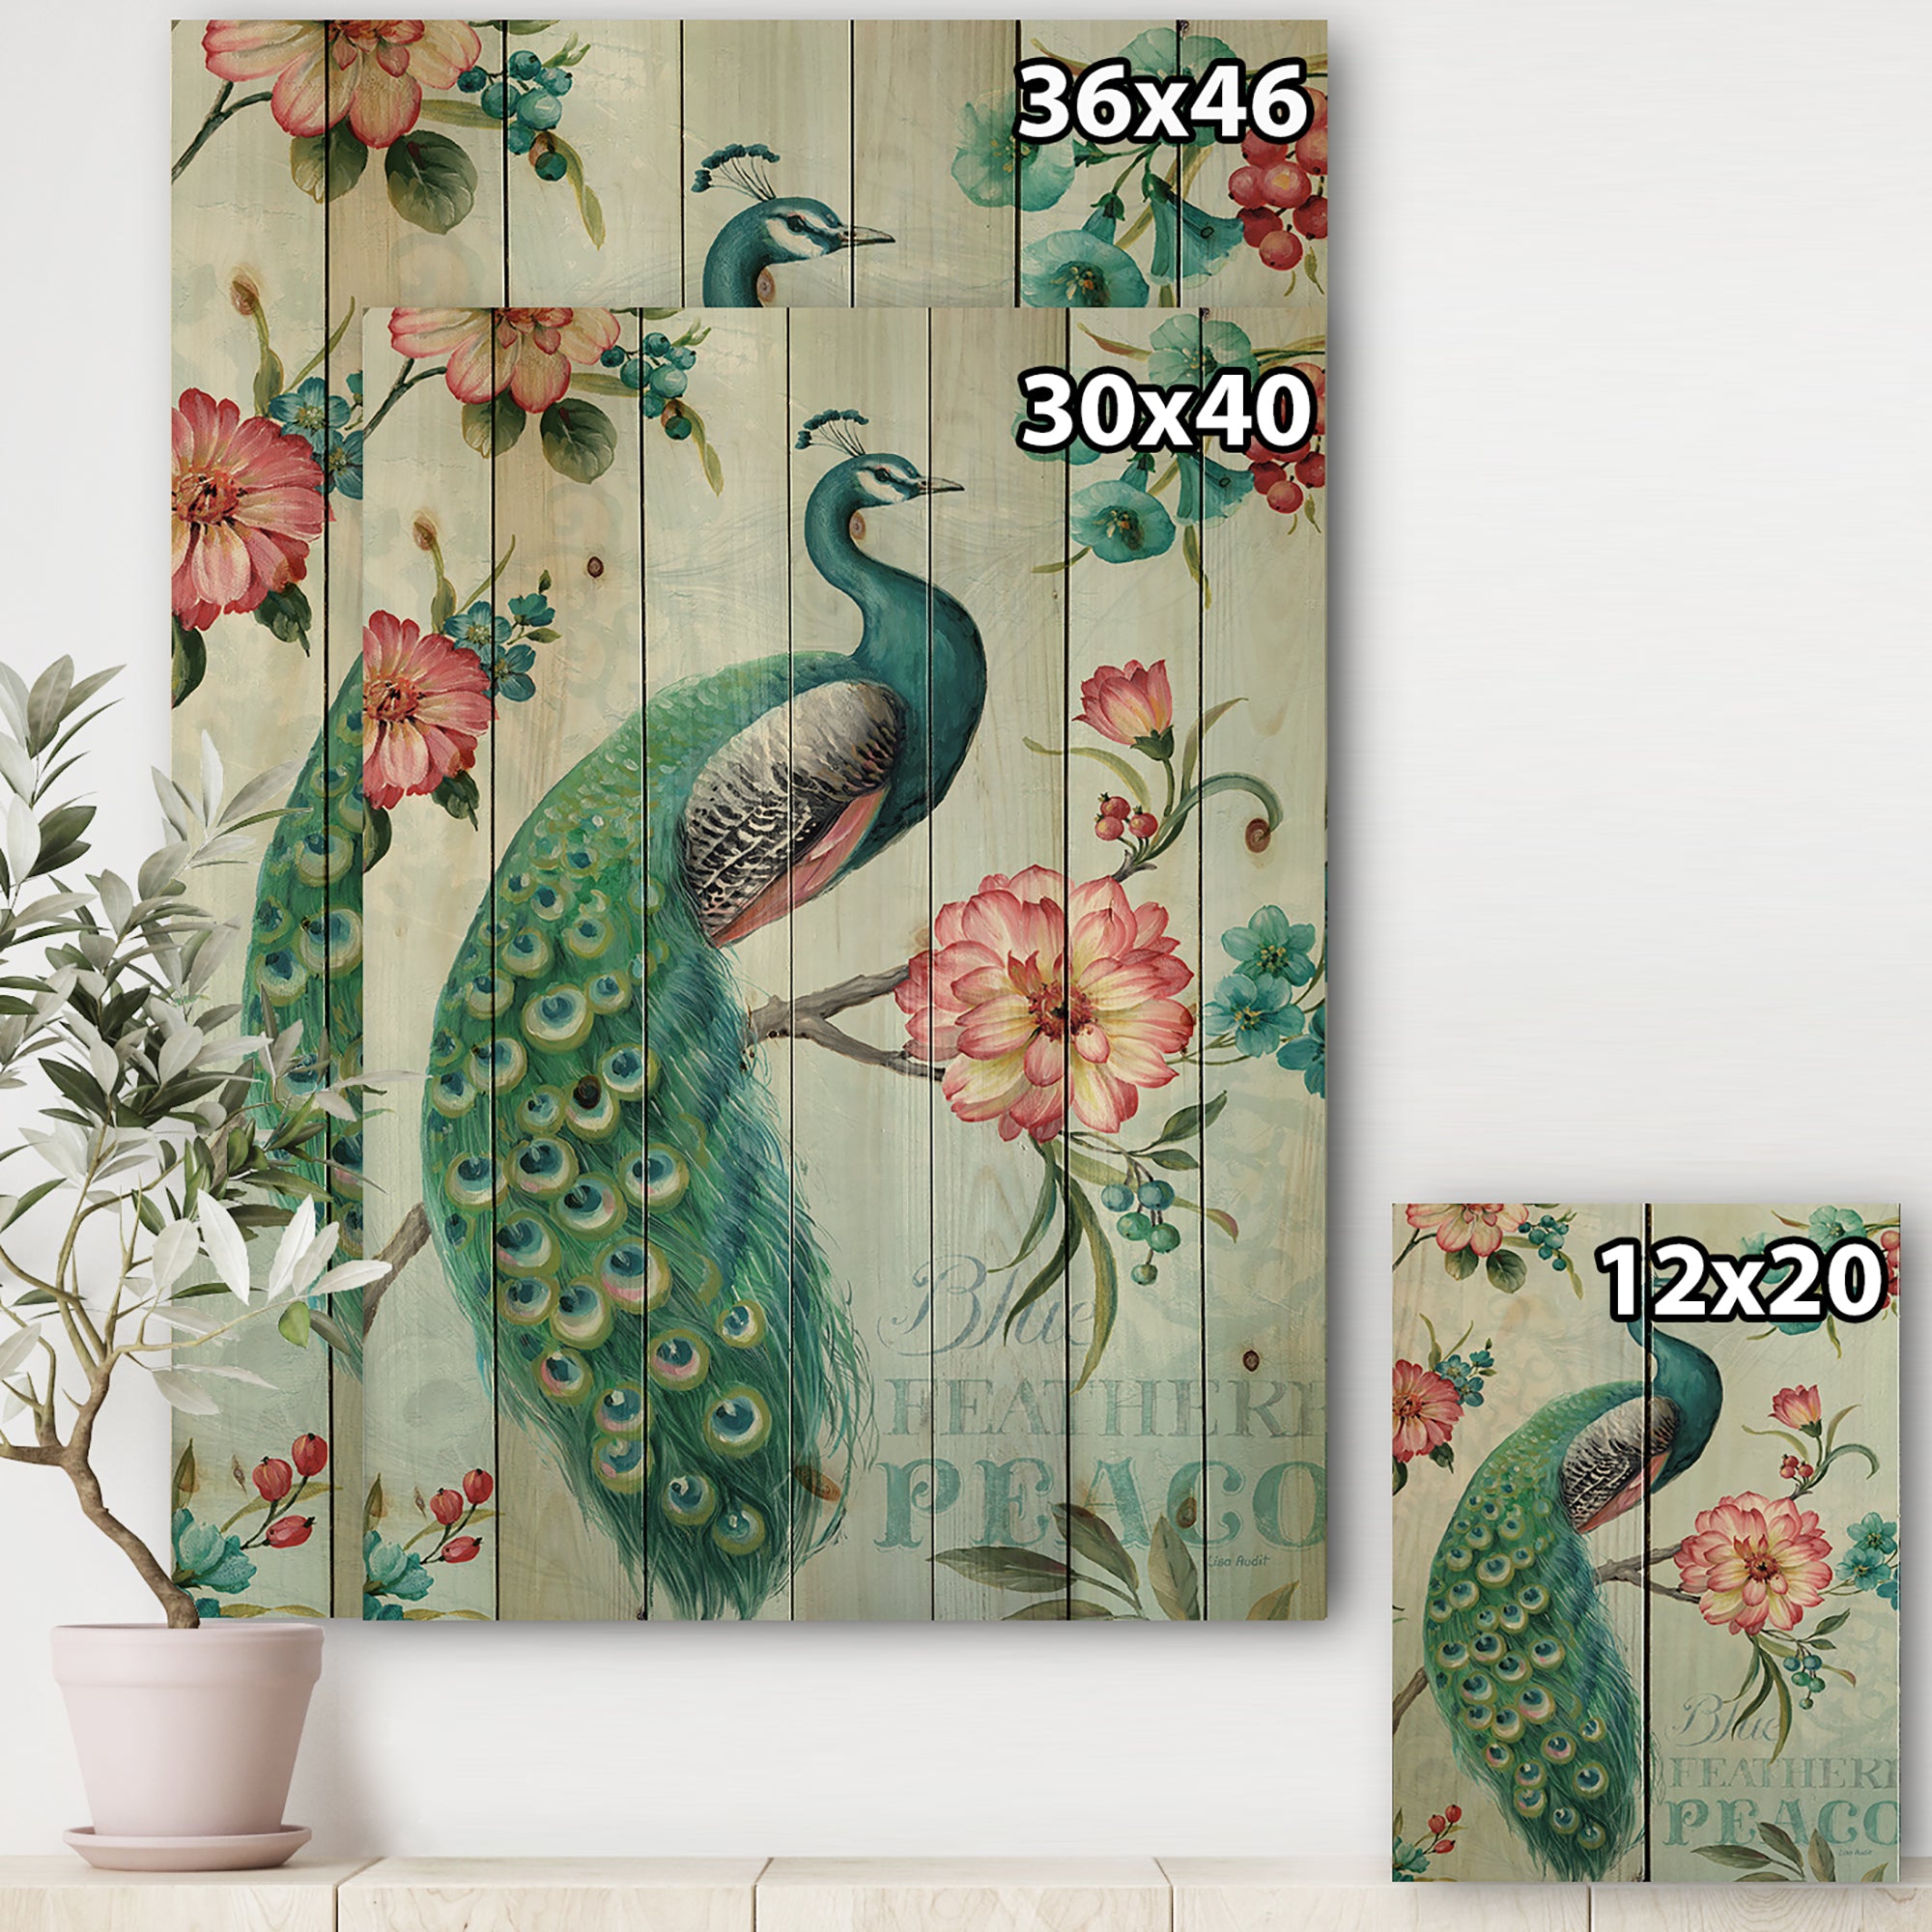 Handpainted Peacock  - Floral and botanical Print on Natural Pine Wood - 15x20